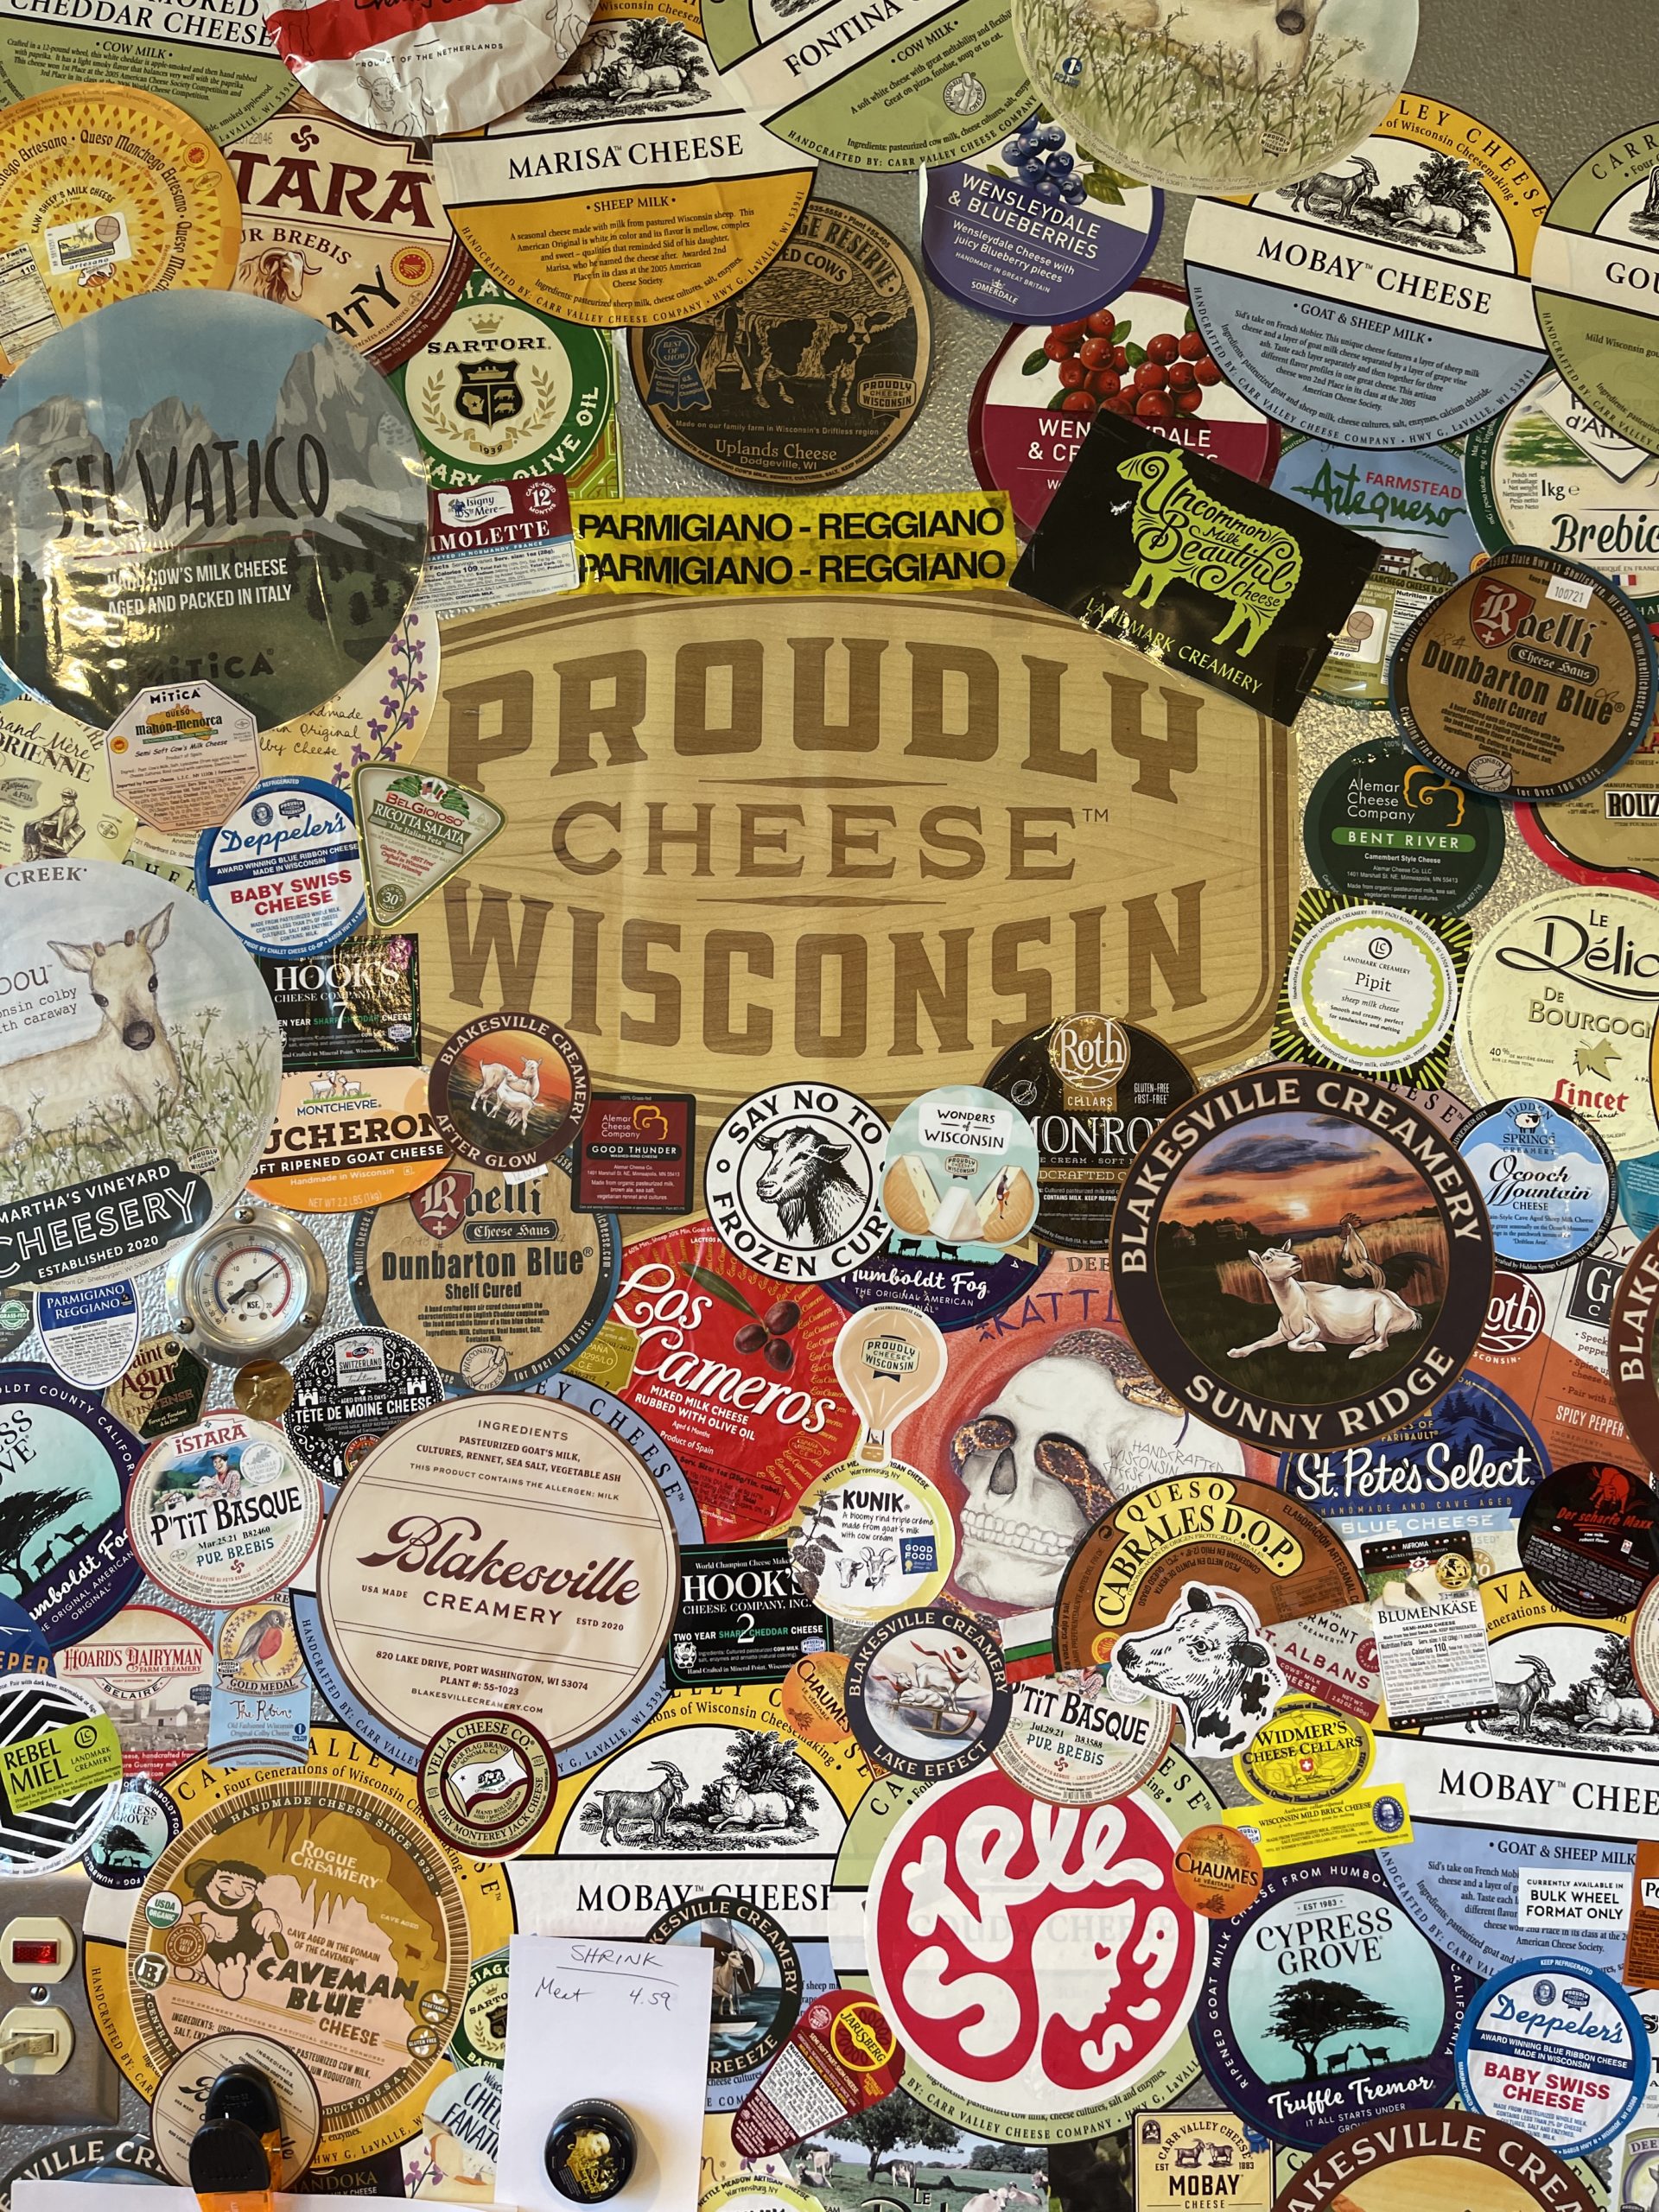 "Proudly Wisconsin Cheese" sign surrounded by cheese stickers from makers and mongers